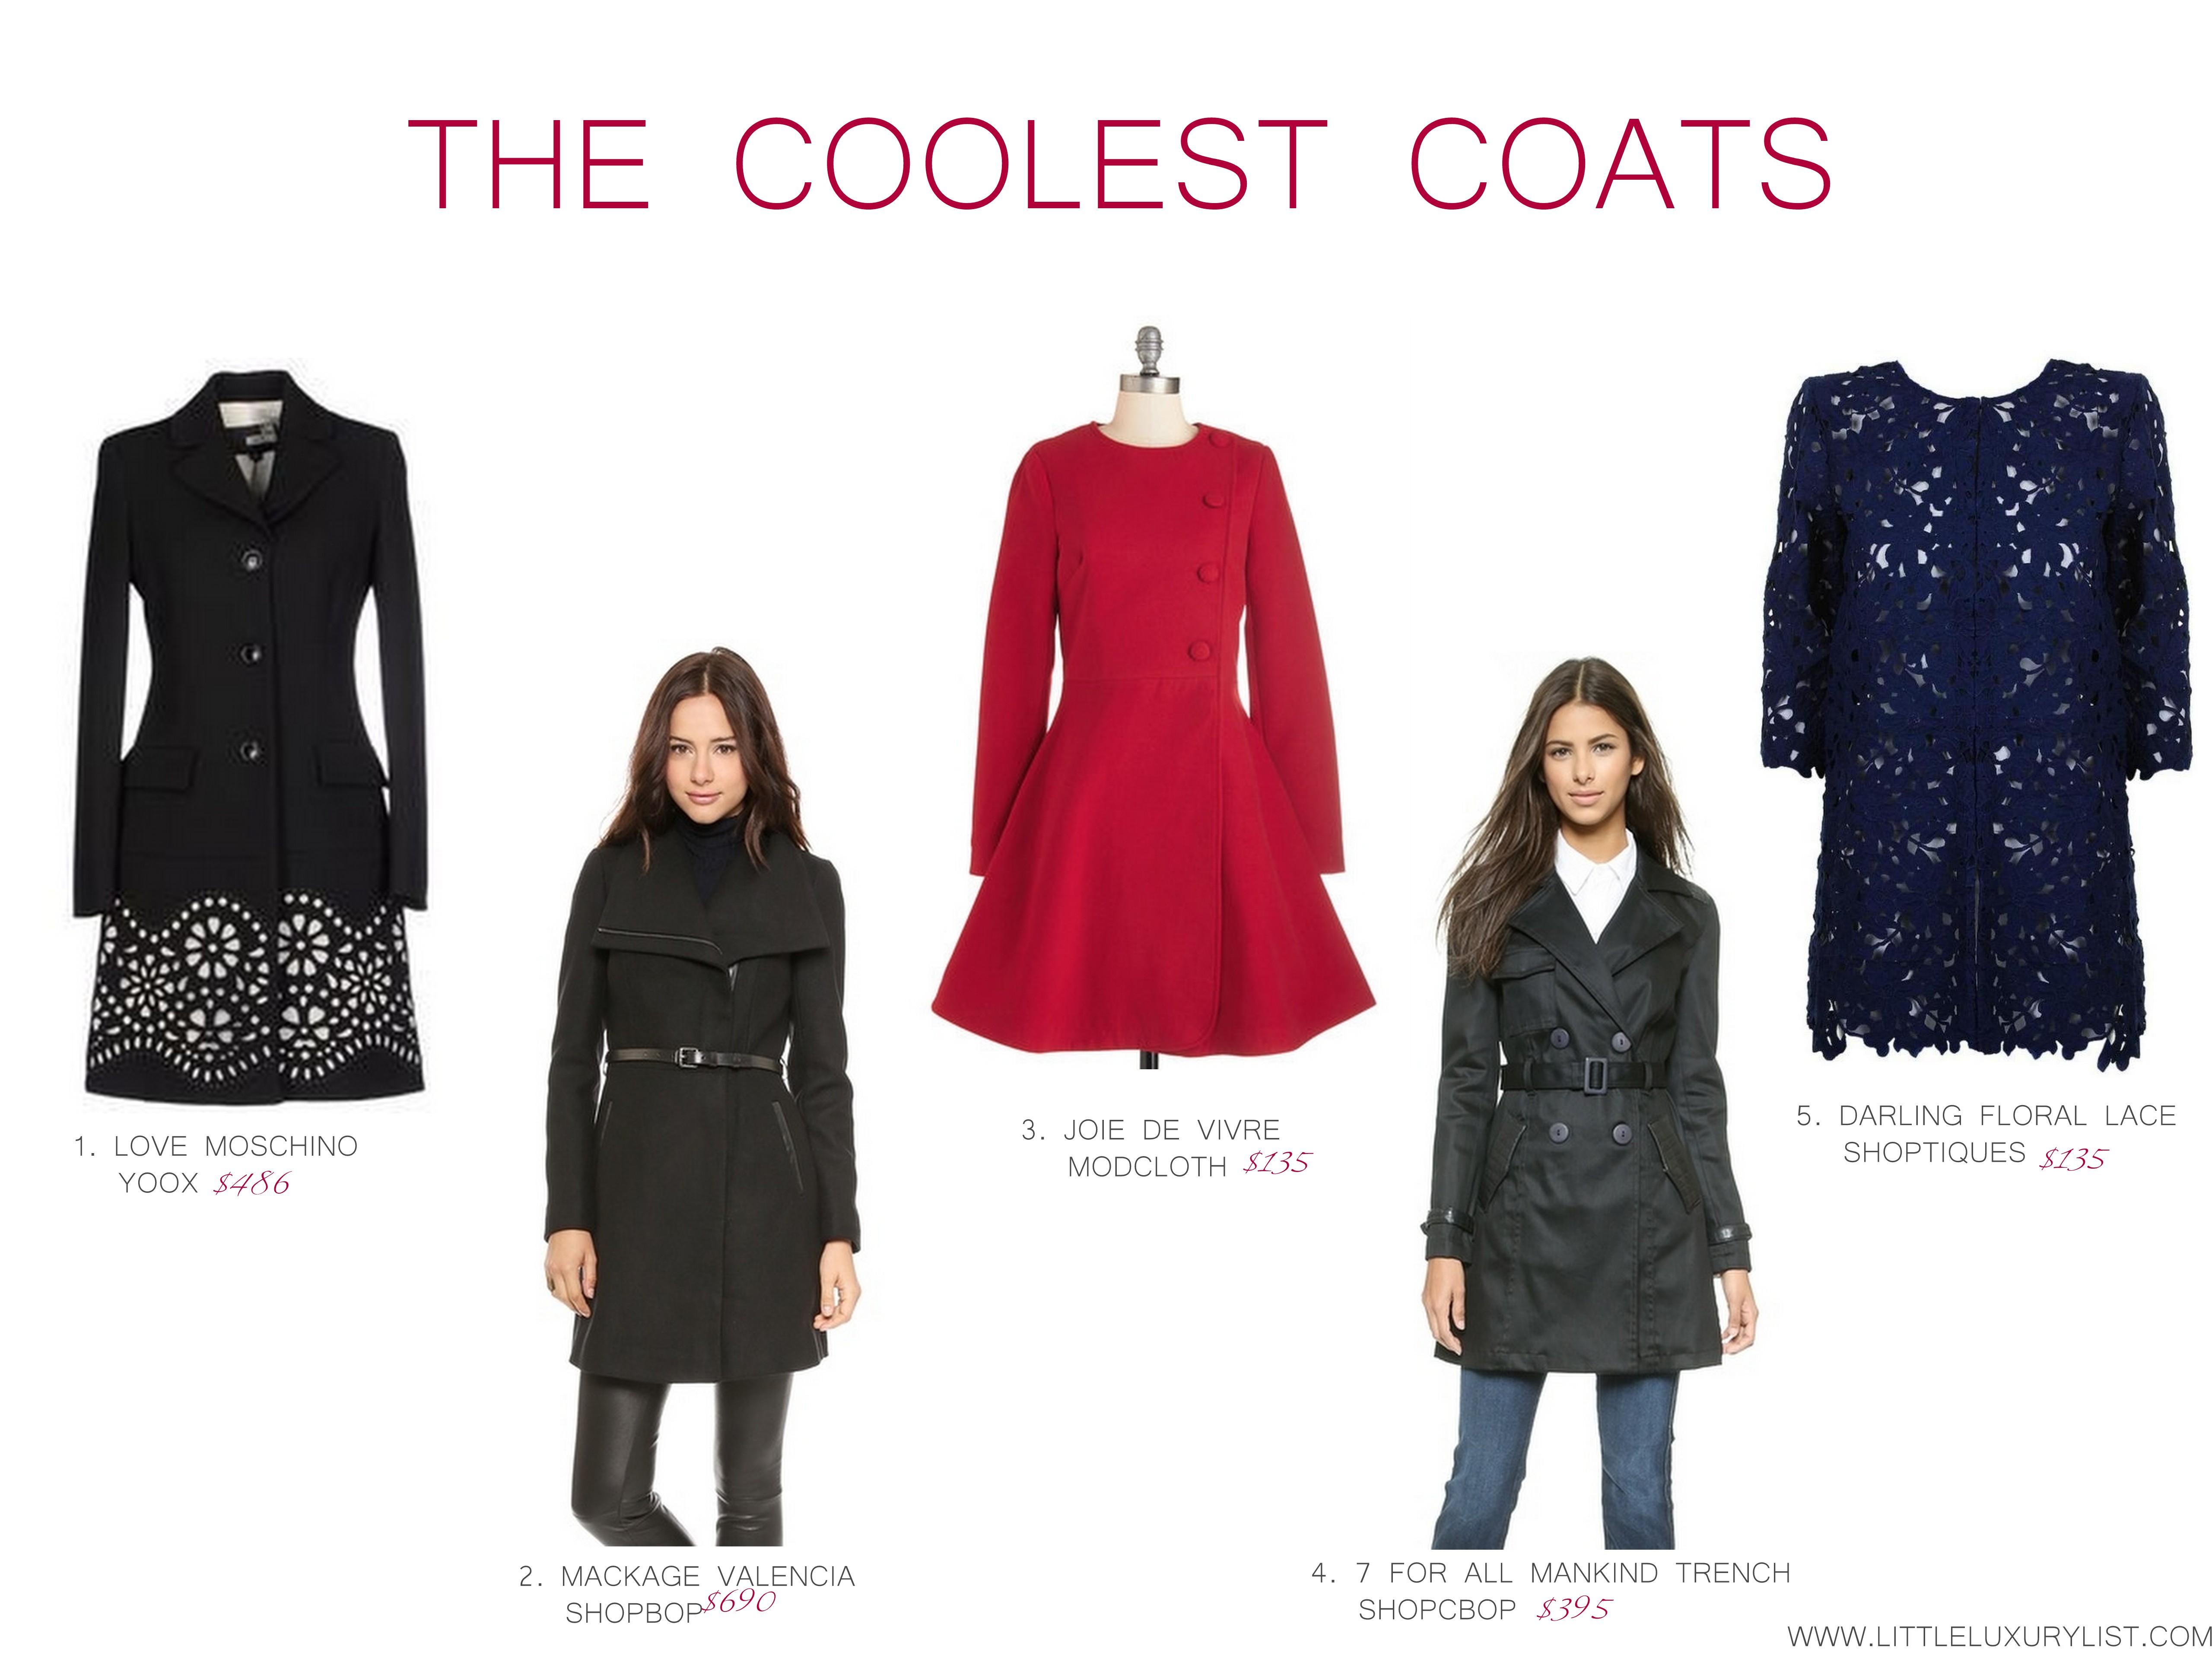 The Coolest Coats by little luxury list